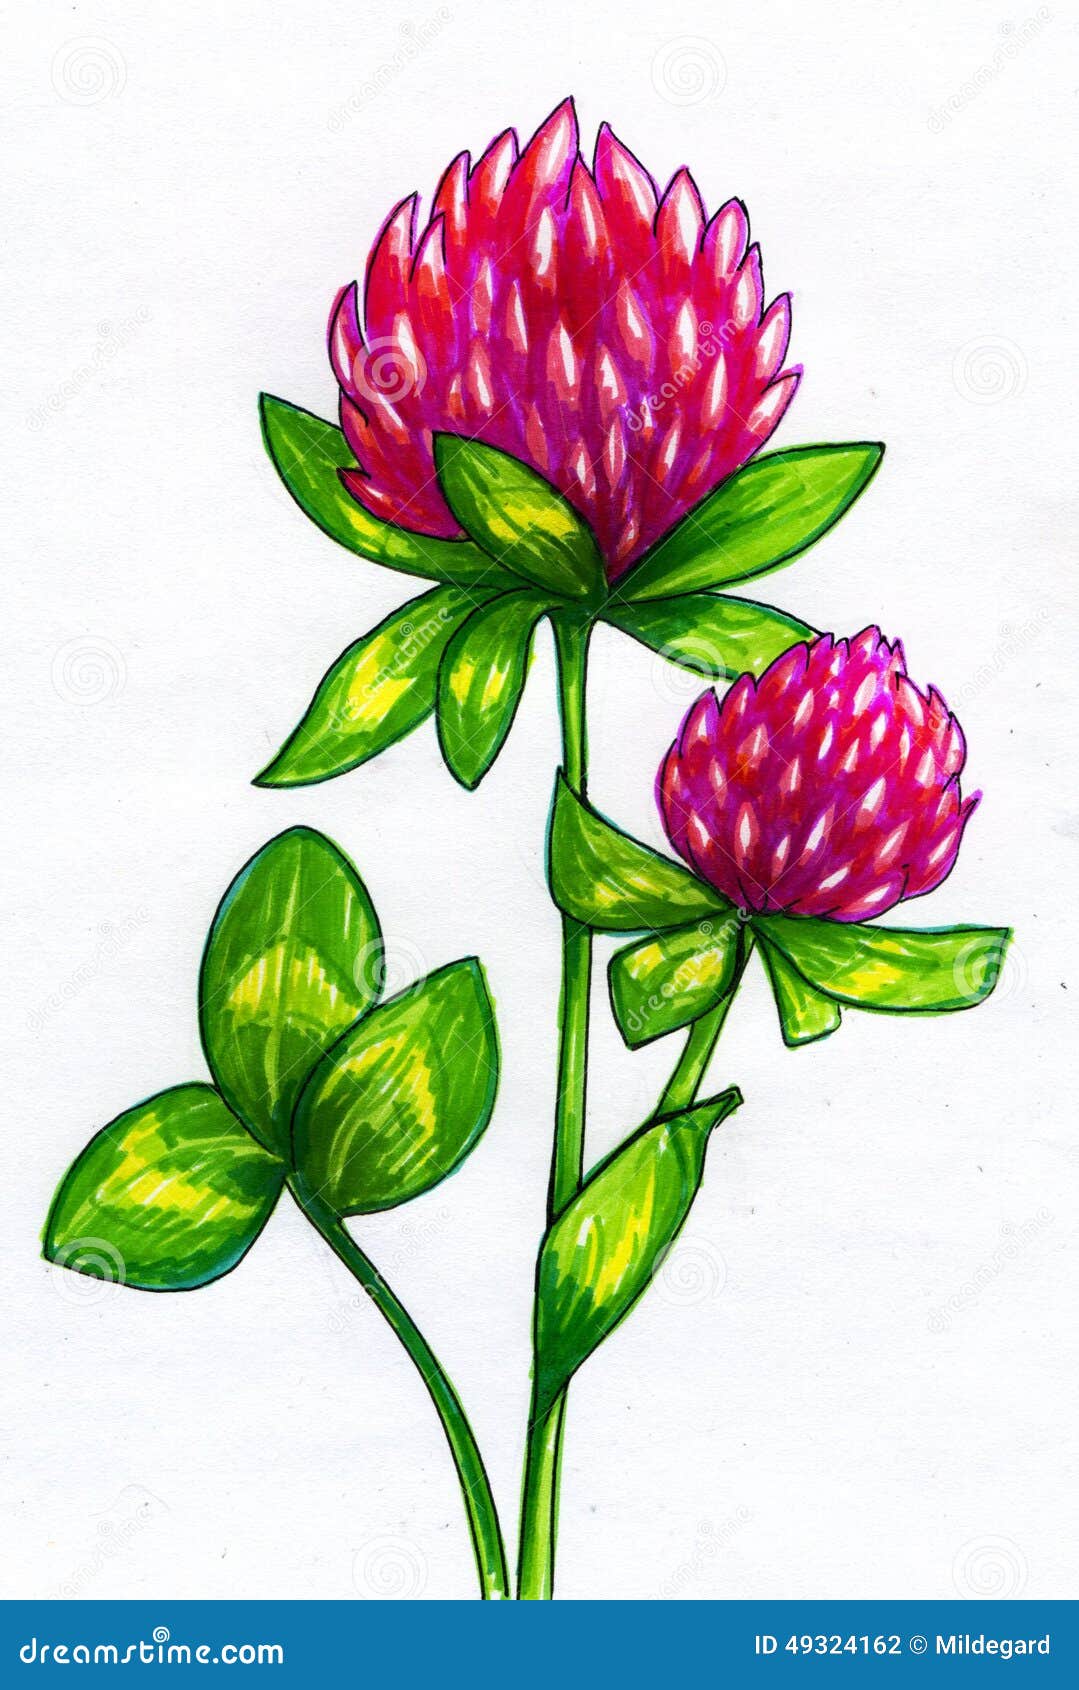 Drawing Of Clover Flowers Stock Illustration - Image: 49324162